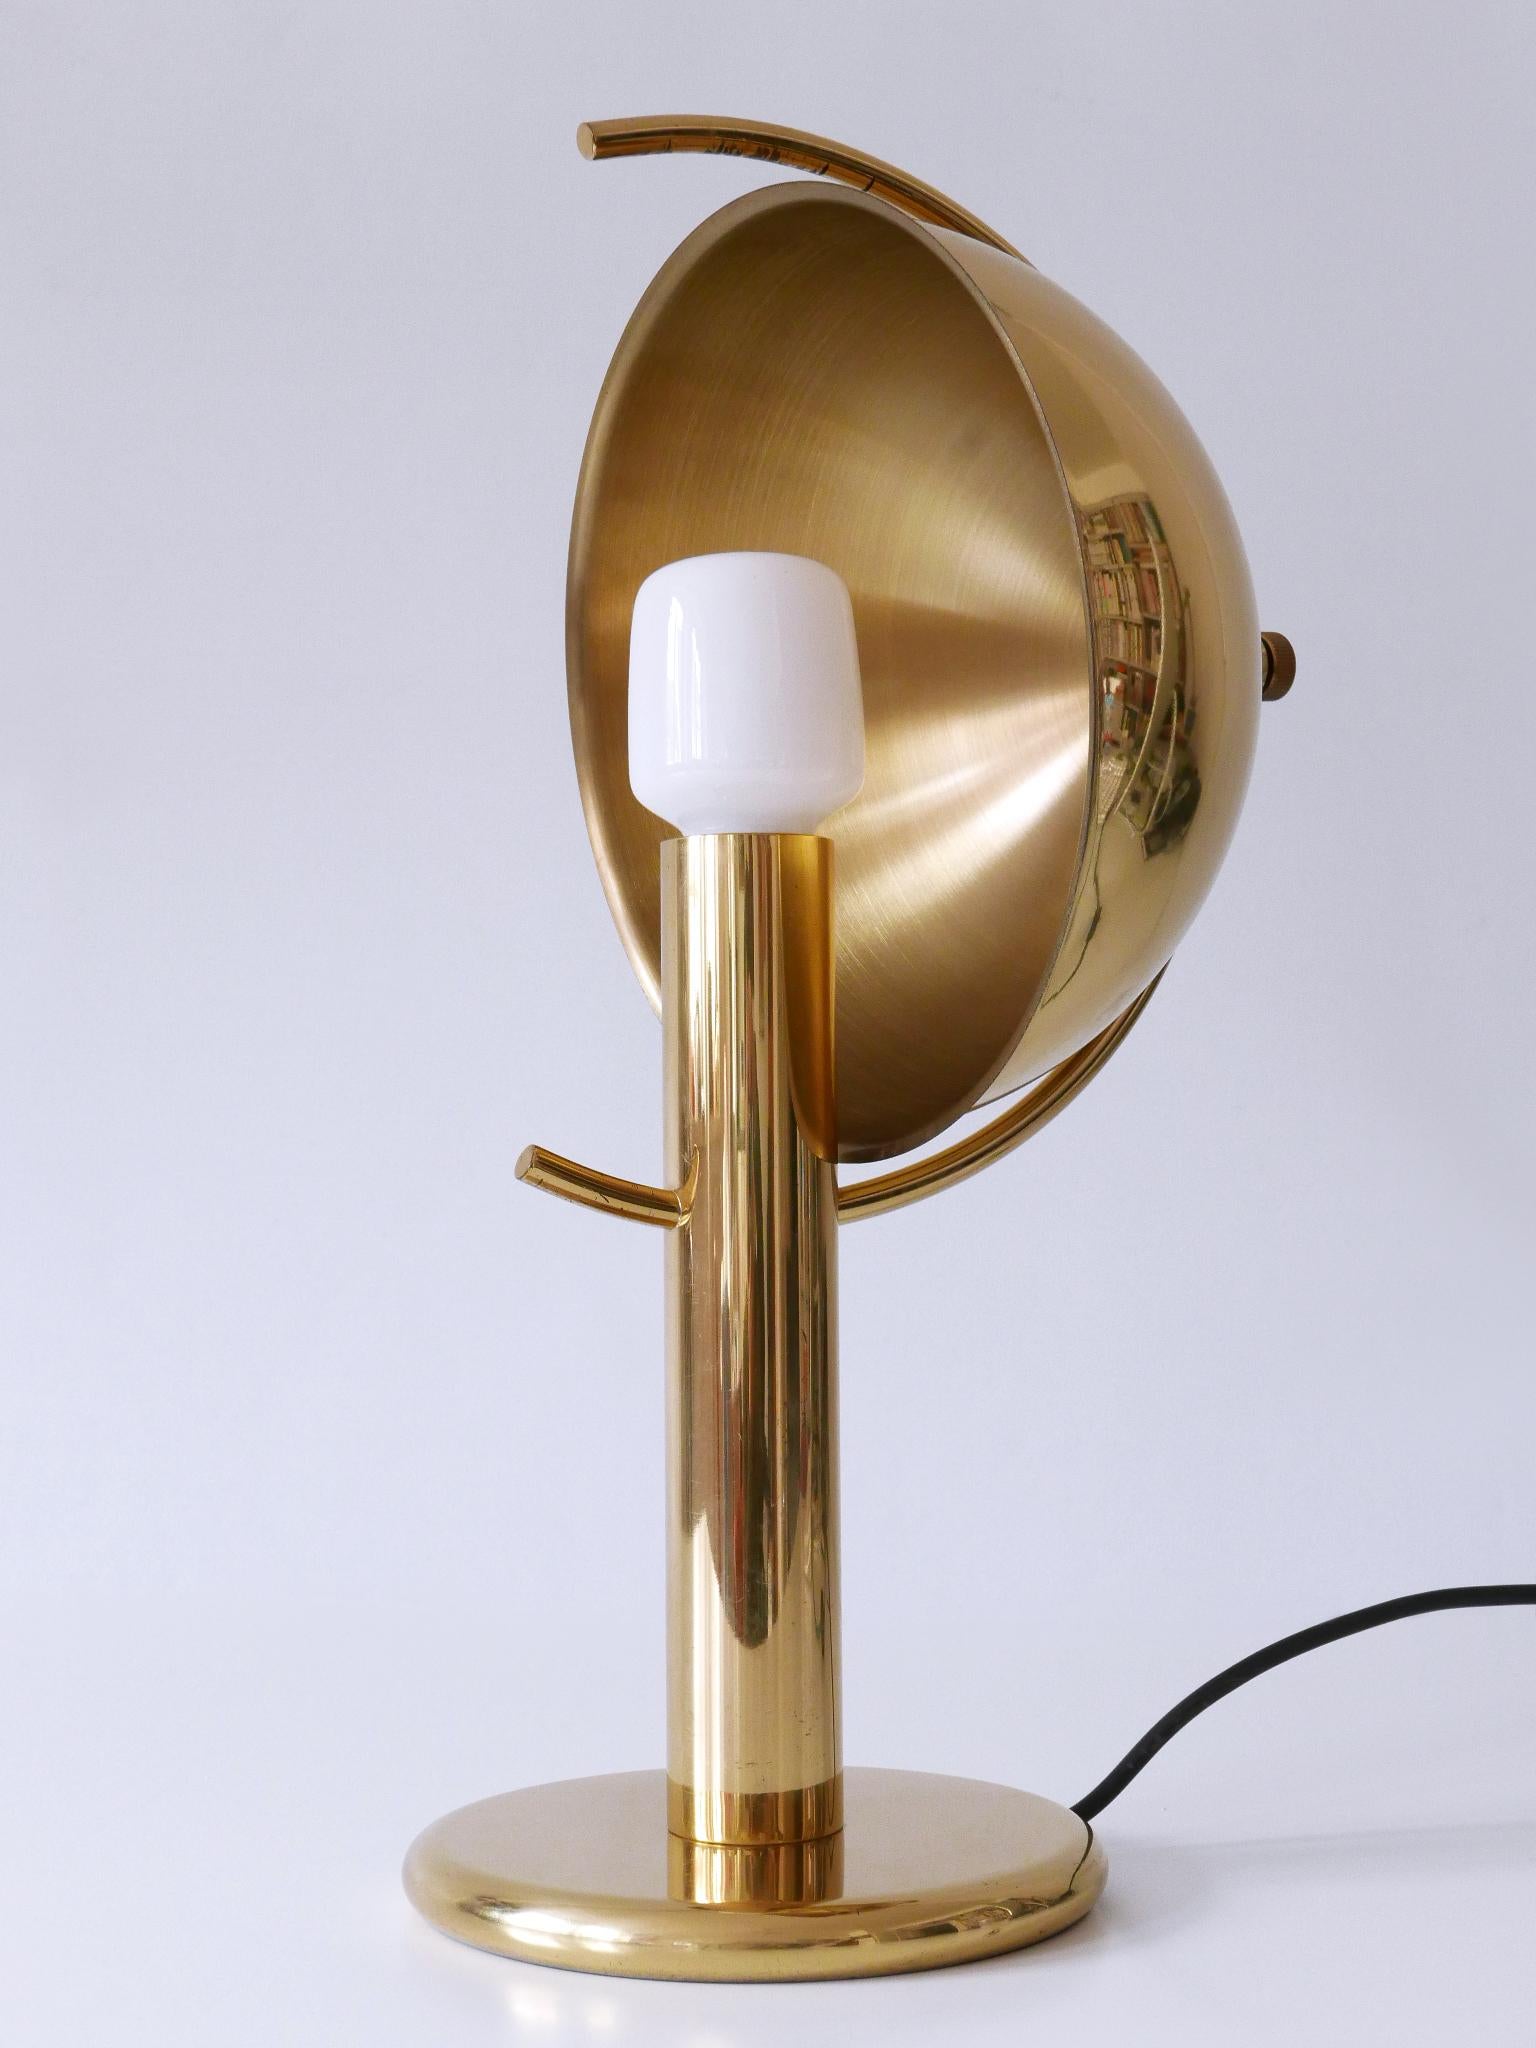 Exceptional Mid-Century Modern Brass Table Lamp by Gebrüder Cosack Germany 1960s For Sale 5